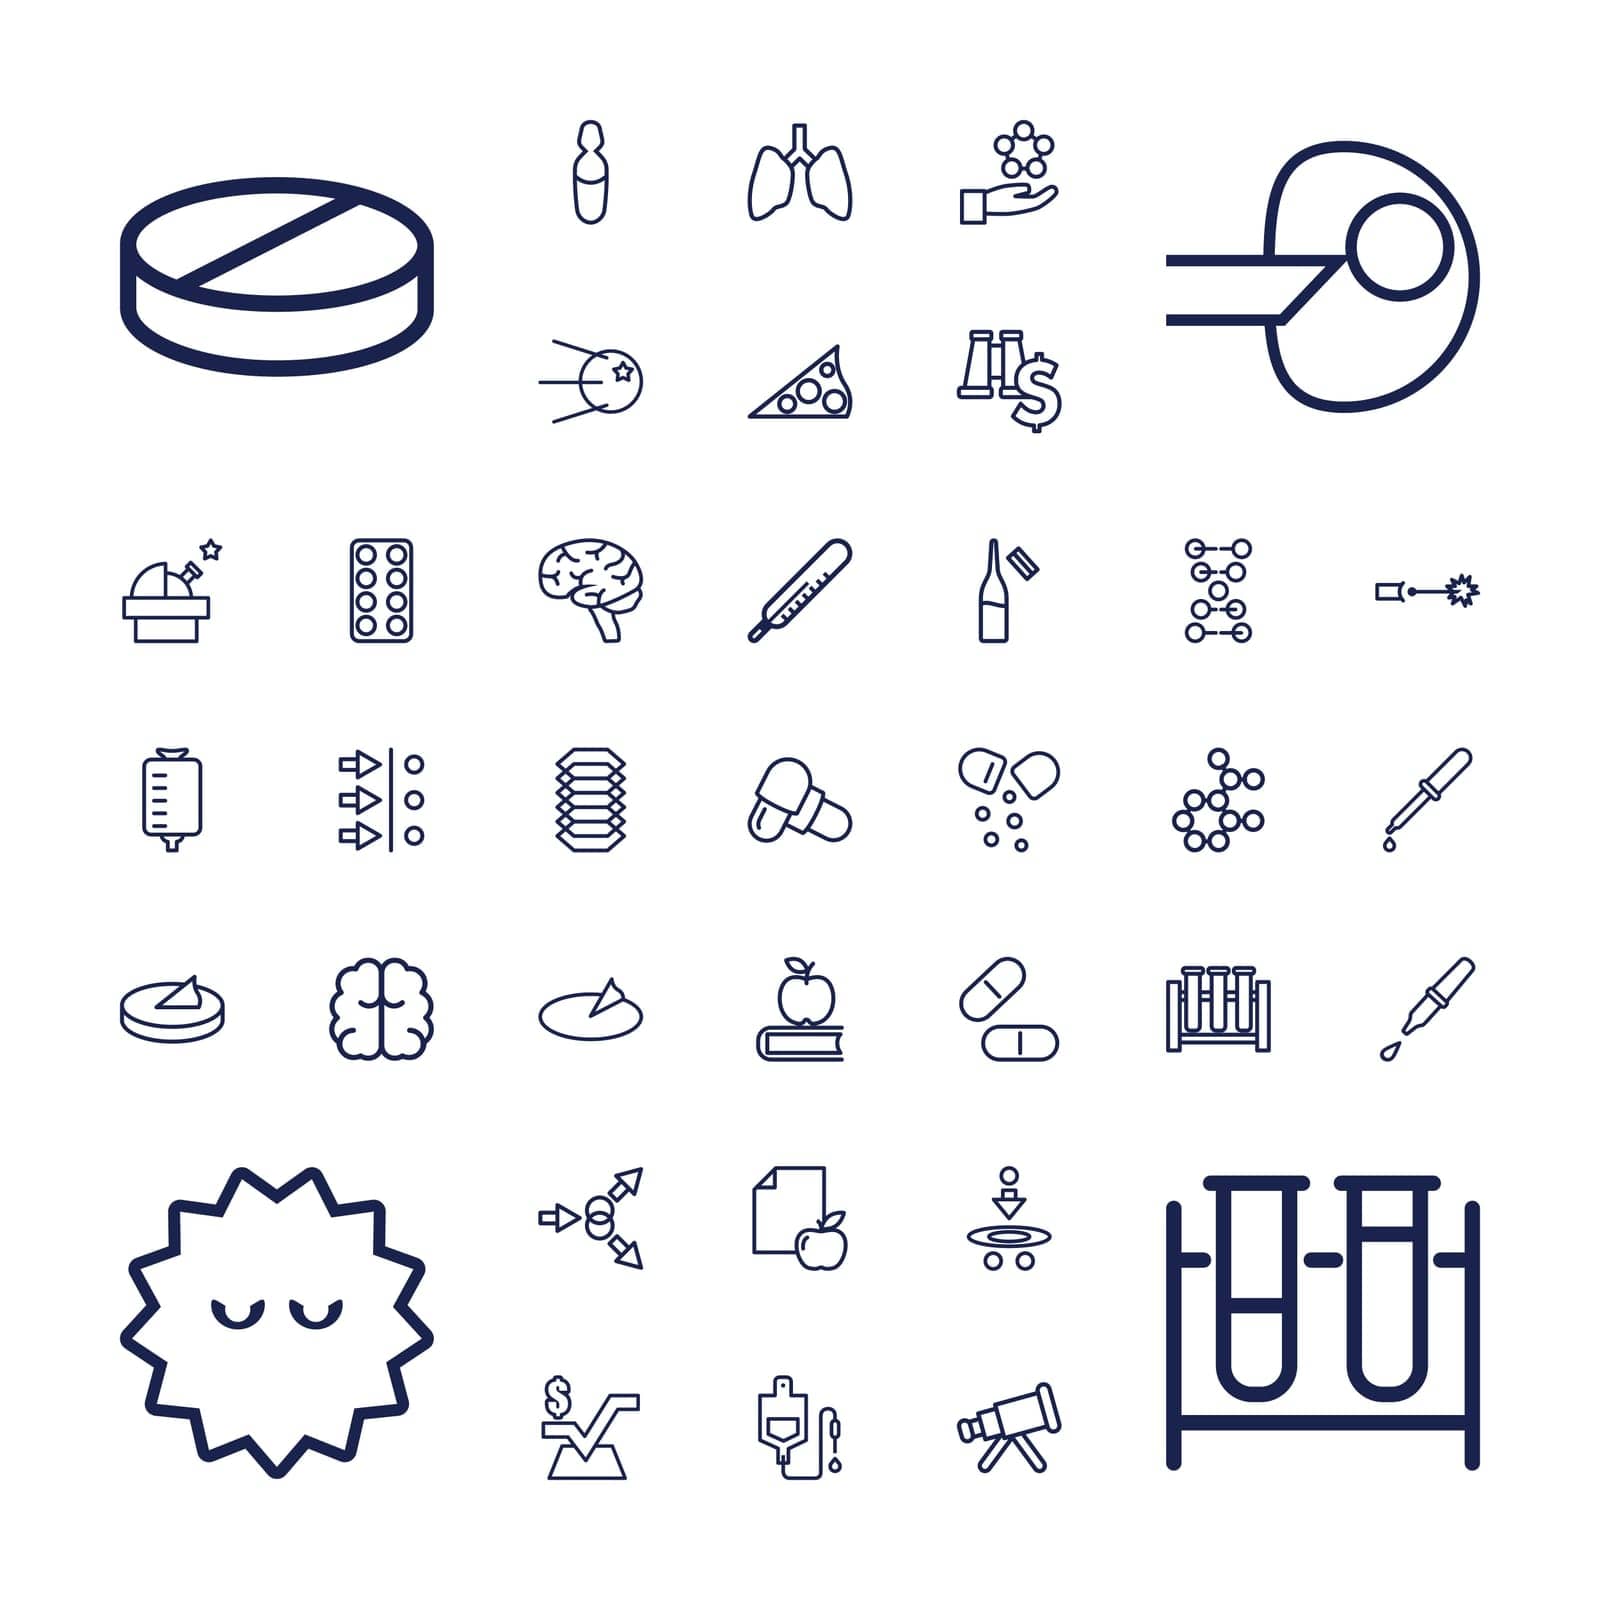 drop,symbol,medical,circuit,bacteria,book,icon,sign,pill,dollar,observatory,apple,paper,dna,and,lungs,vector,hand,on,move,set,test,in,binoculars,electric,counter,brain,sundial,square,core,with,tube,science,pipette,ampoule,illustration,thermometer,atom,telescope,mathematical by ogqcorp